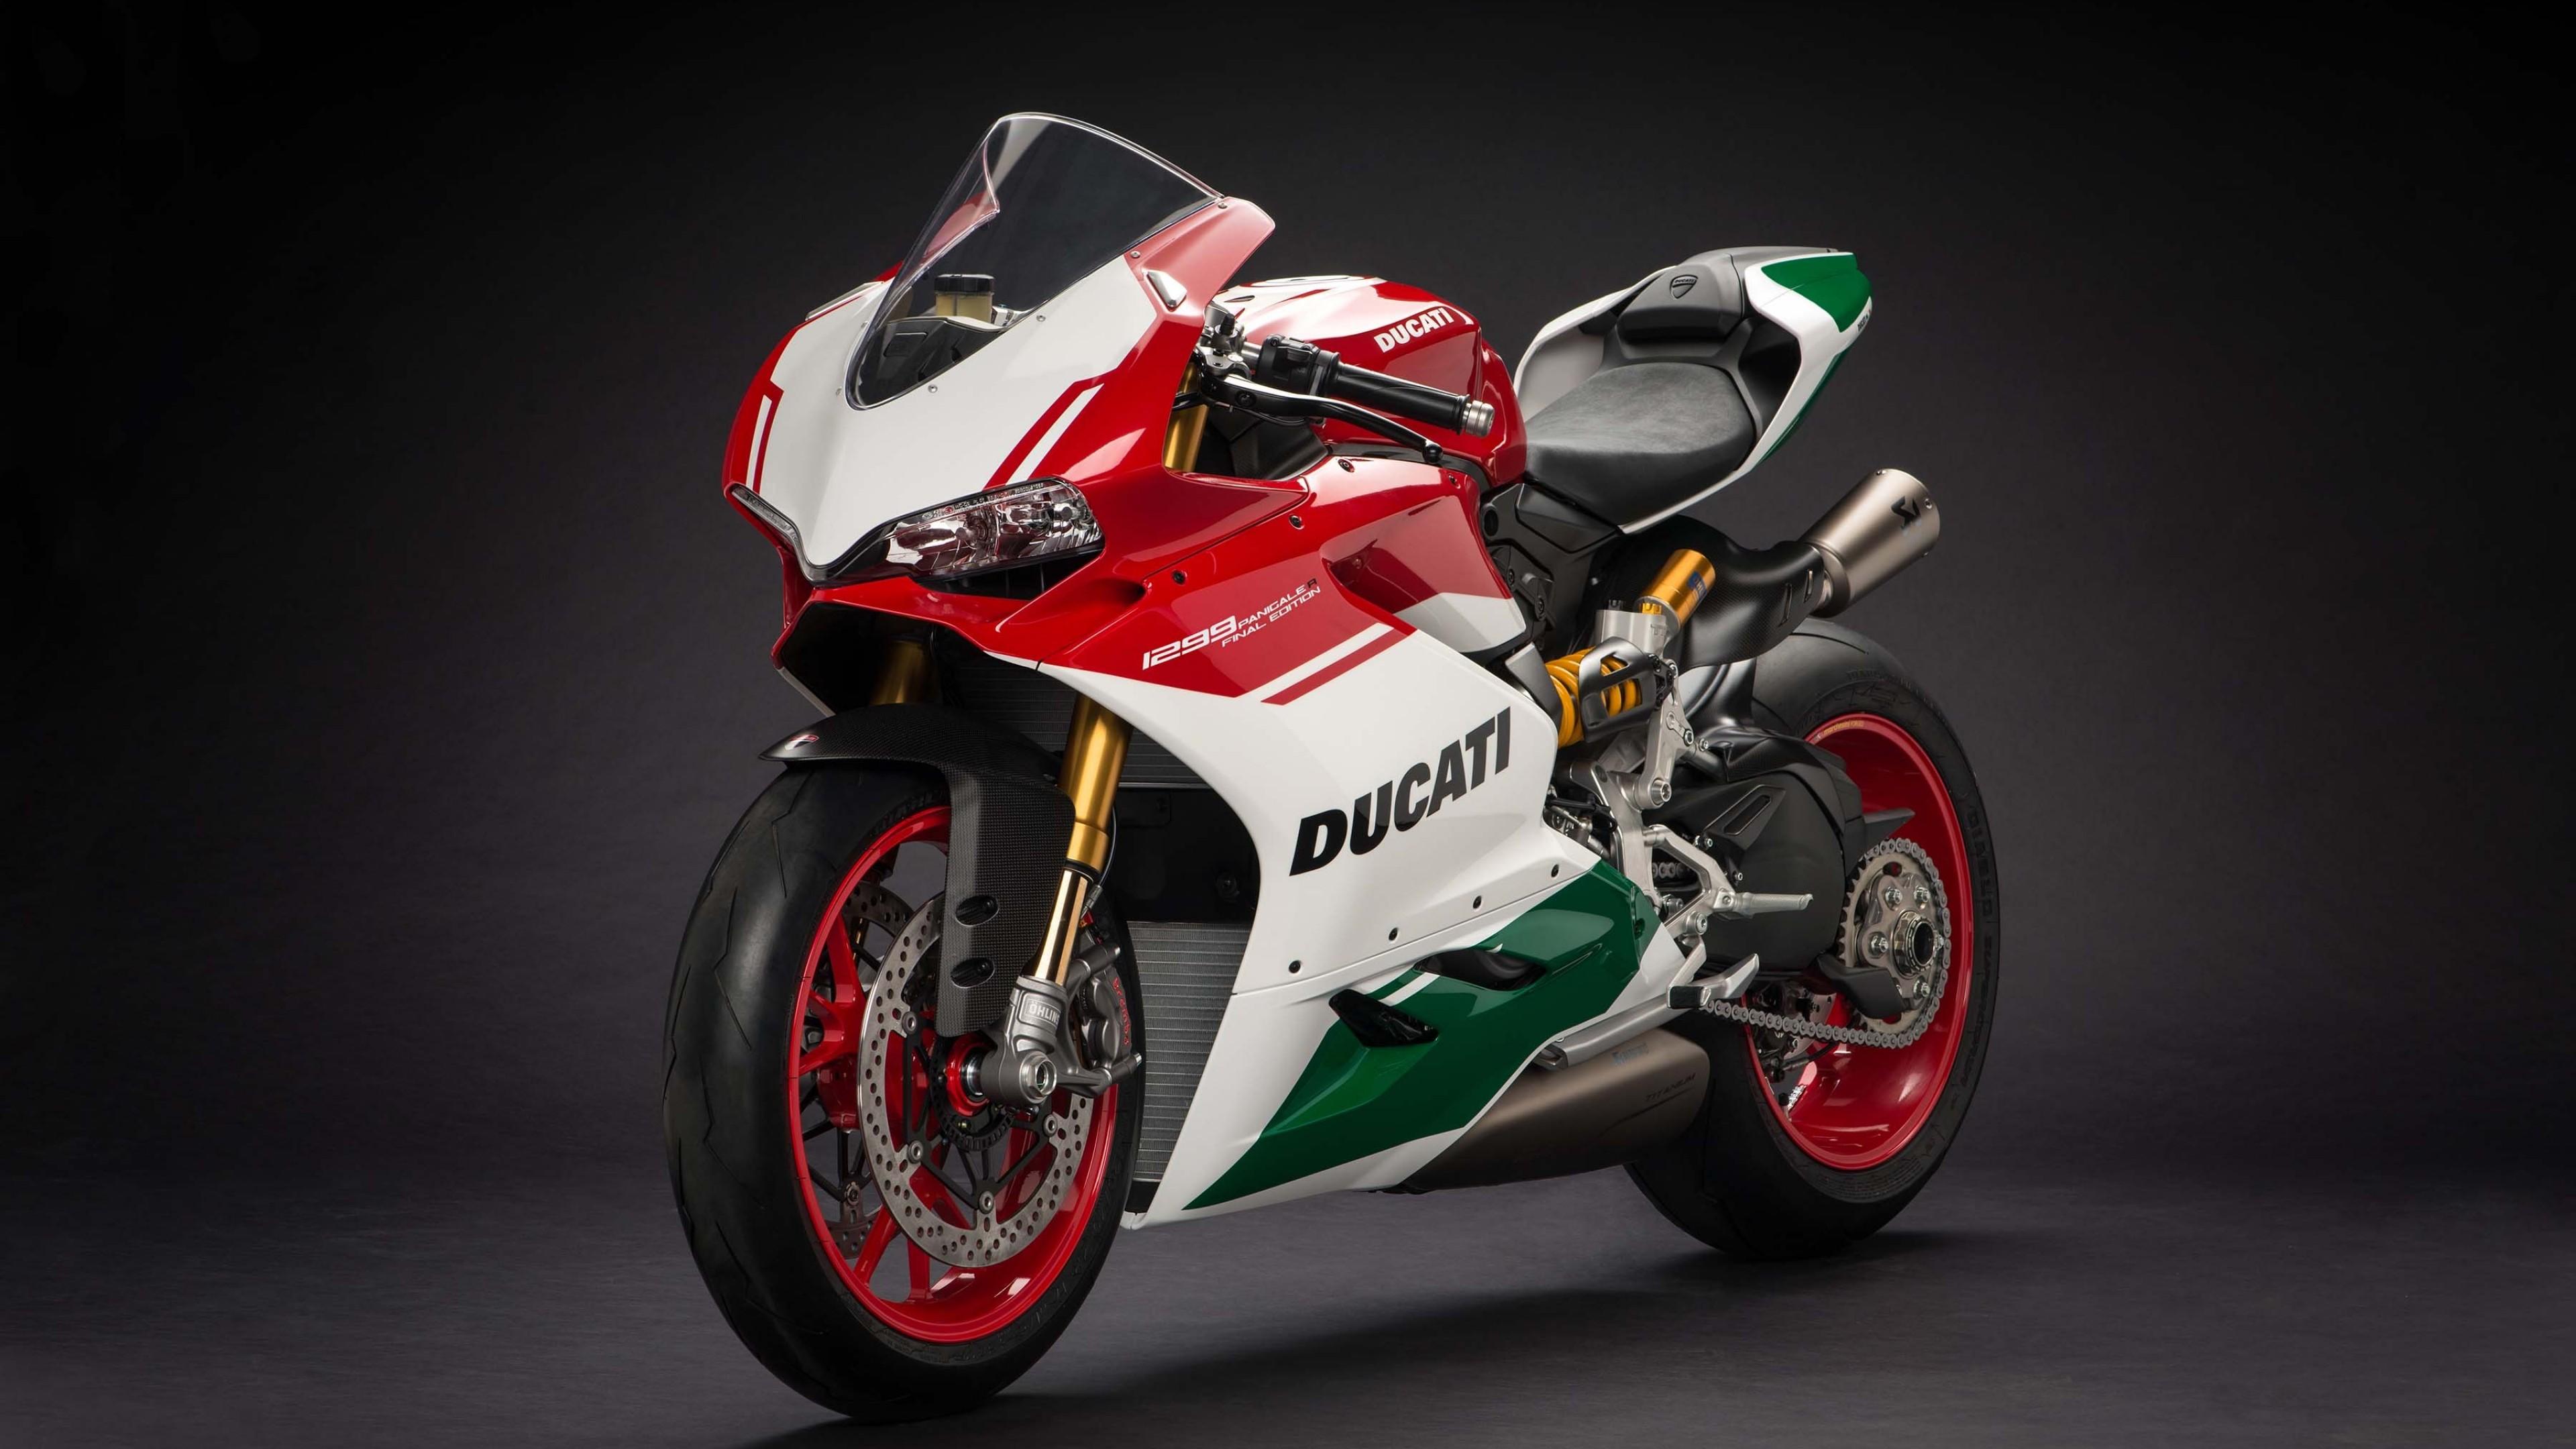 New Ducati 1199 Panigale R Wallpaper High Definition To Download